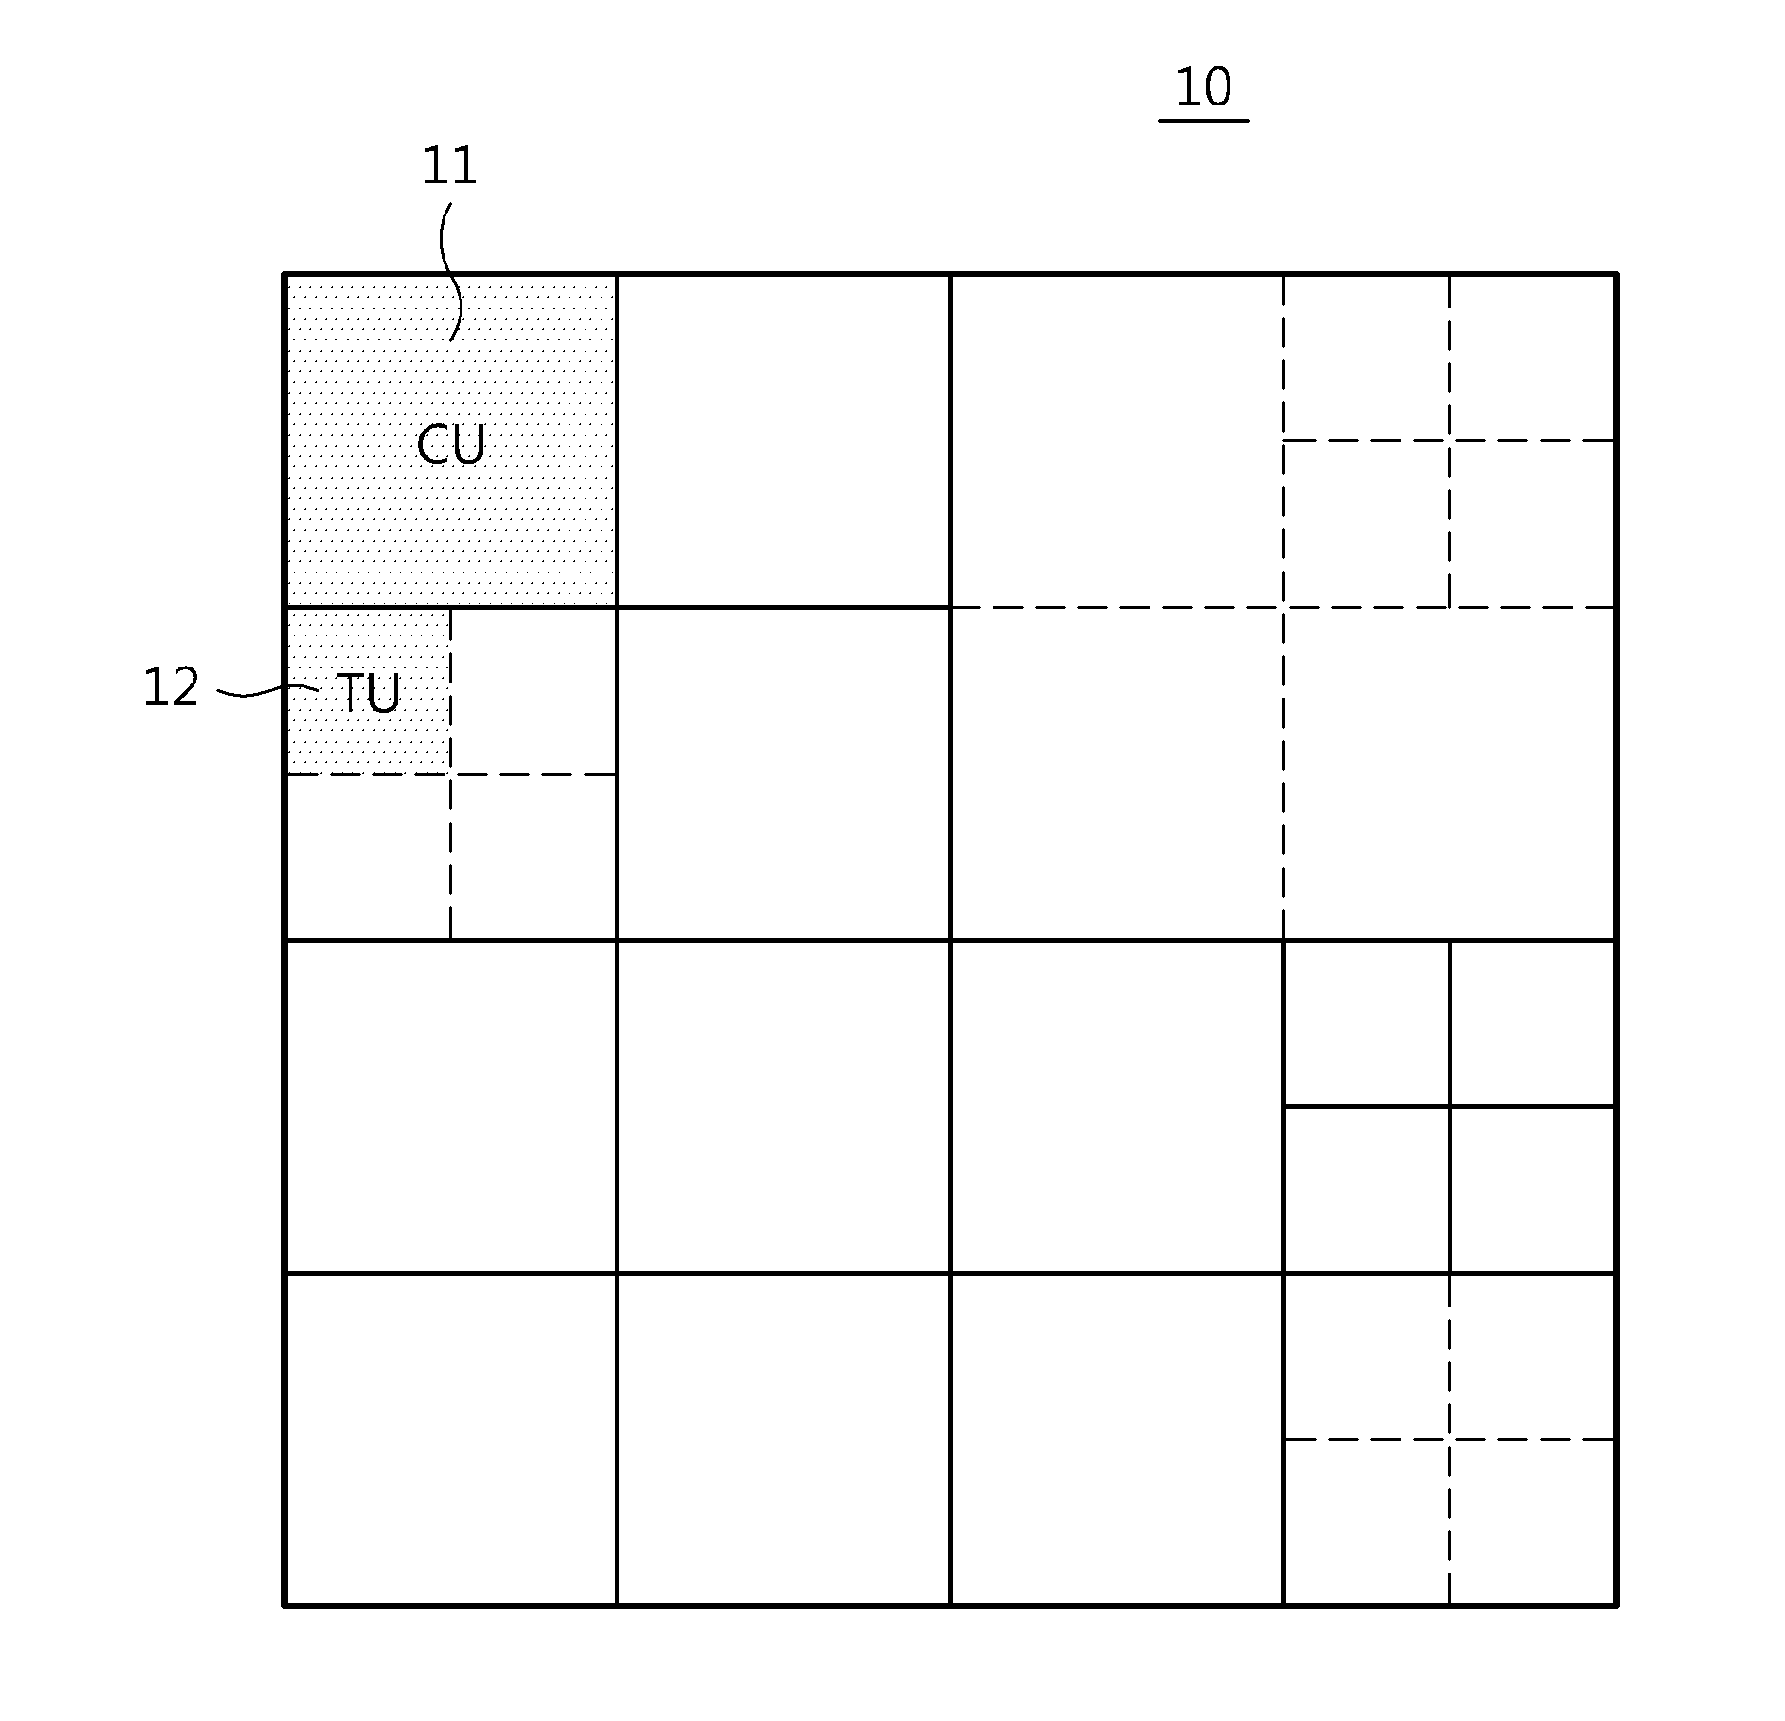 Apparatus and method for determining dct size based on transform depth